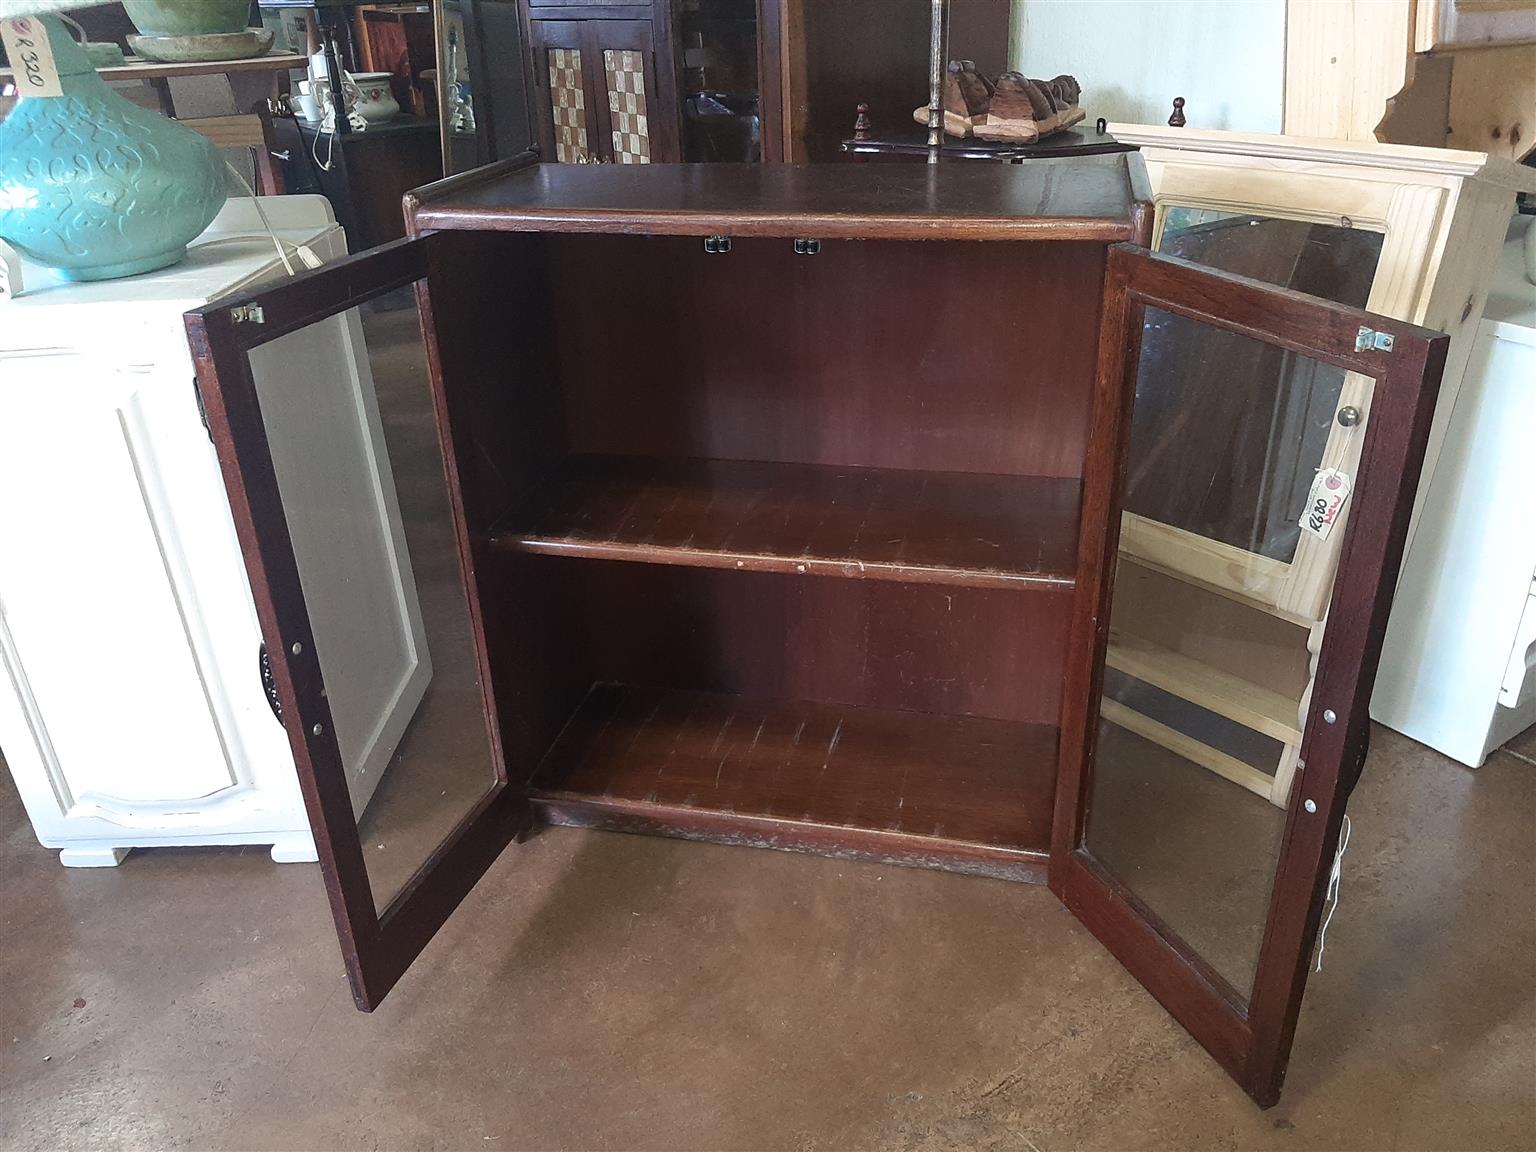 Small, glass-fronted bookcase or display cabinet